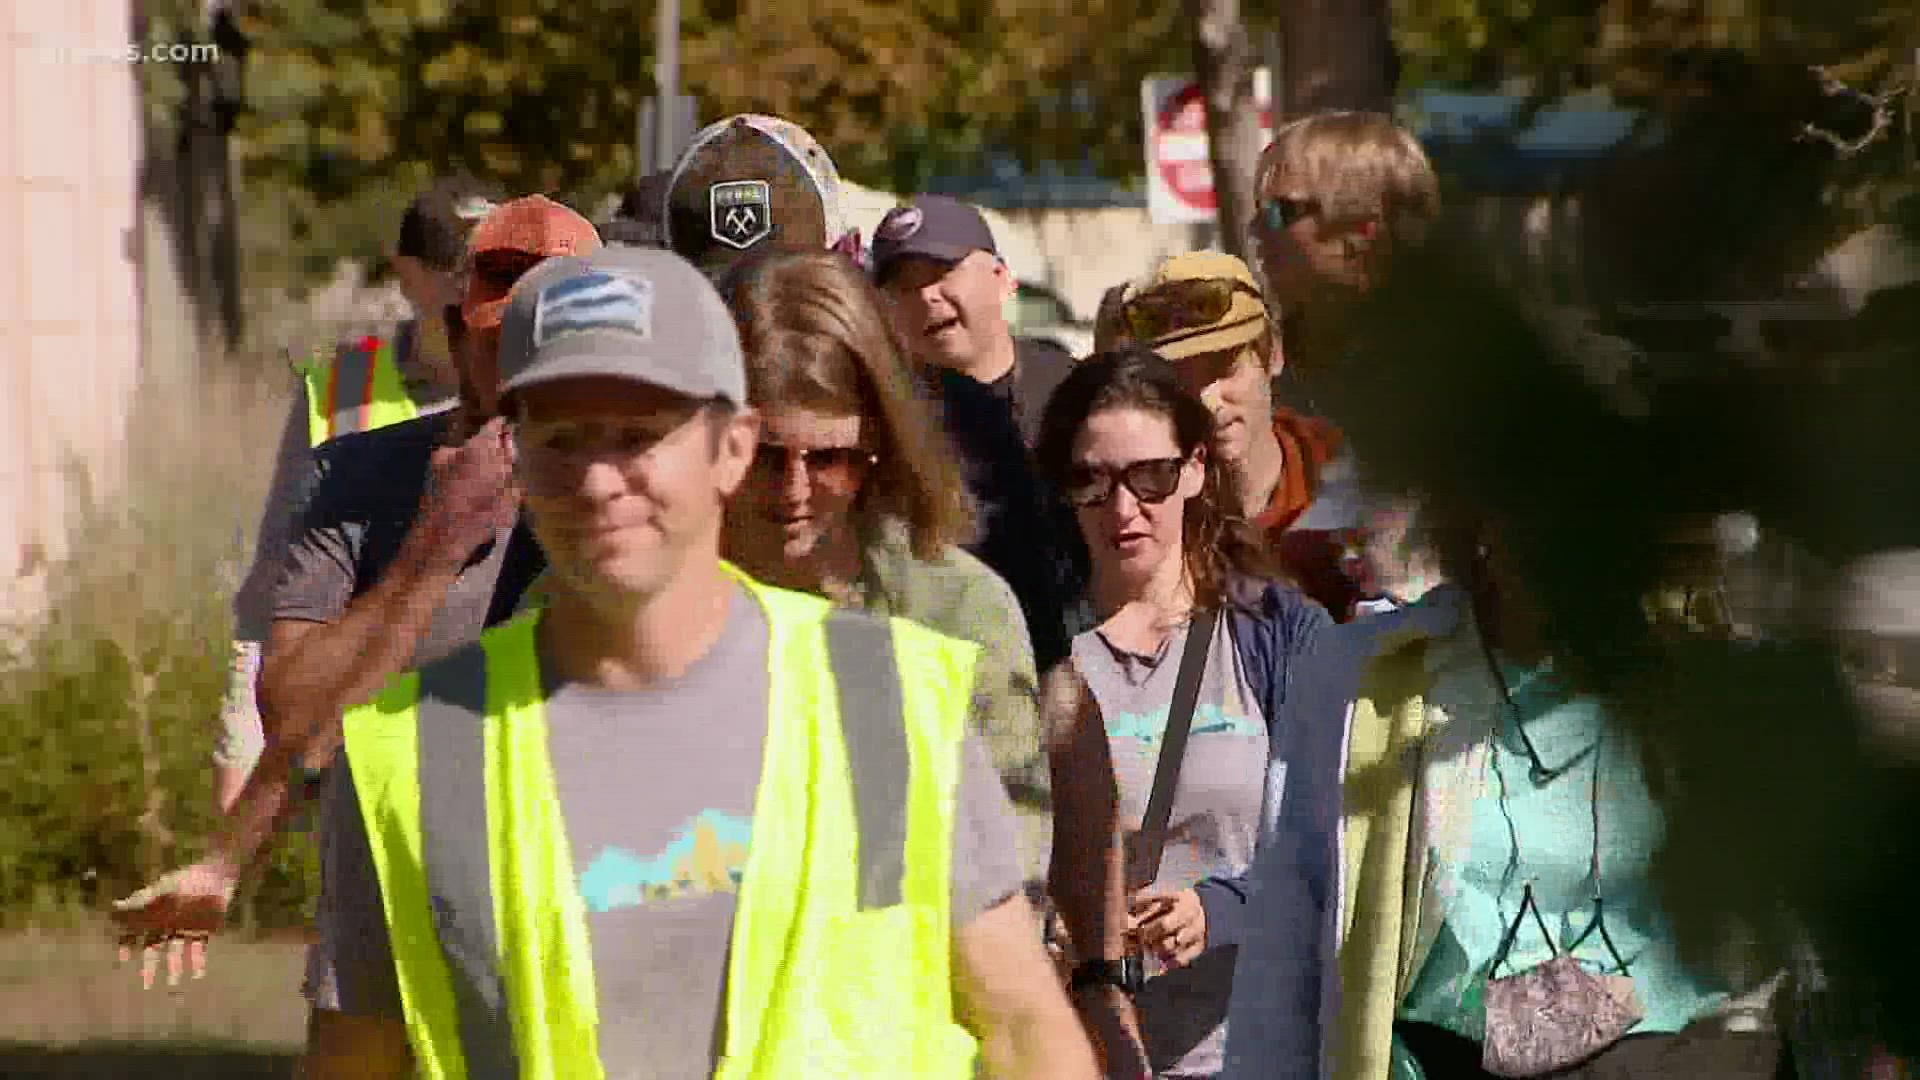 The Denver Streets Partnership took city leaders on a walking tour of the problems on Saturday.